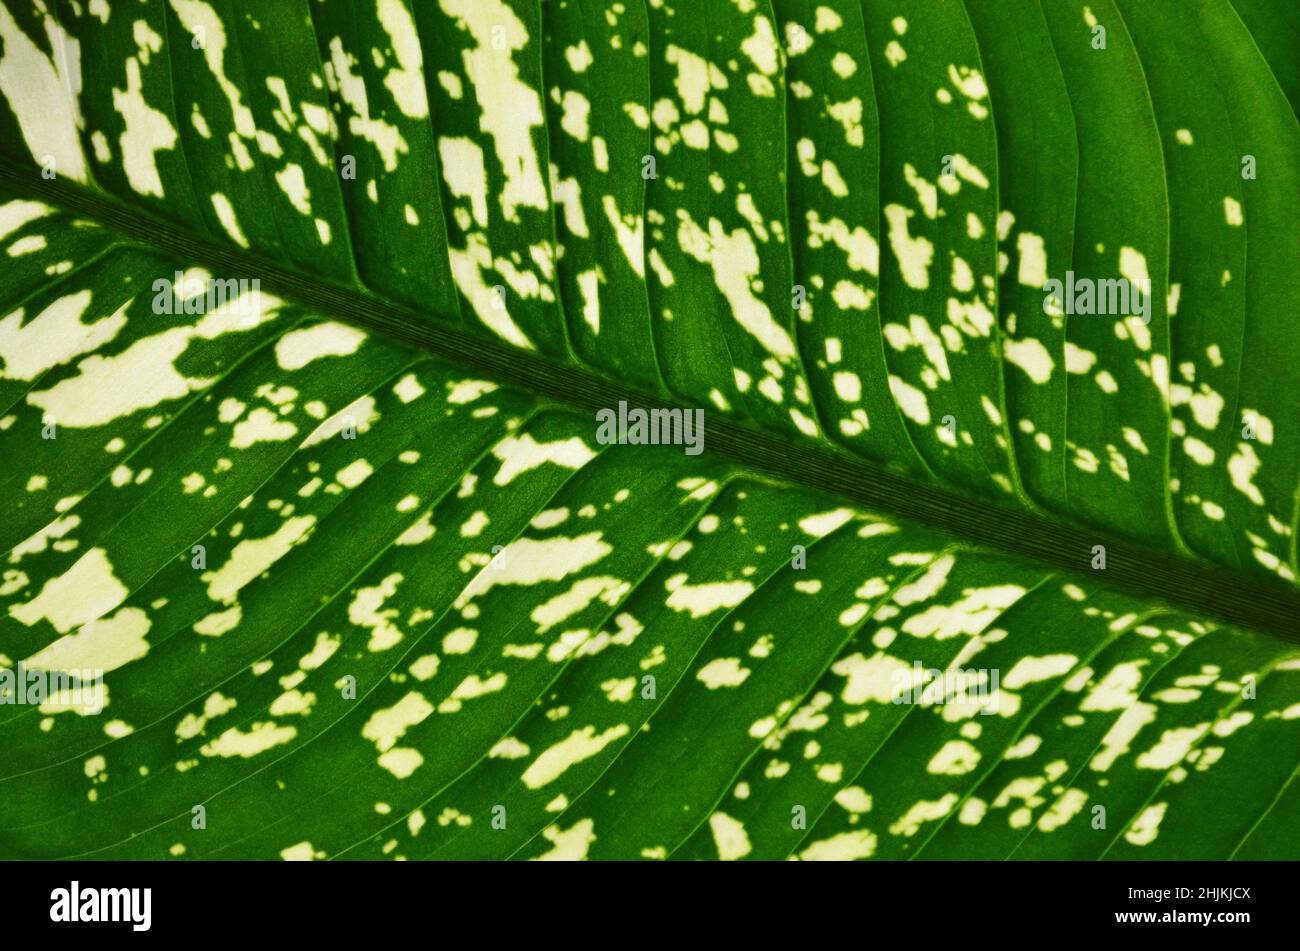 Fragment of a dieffenbachia leaf as a green abstract background. Green leaf containing light spots and flecks. Stock Photo